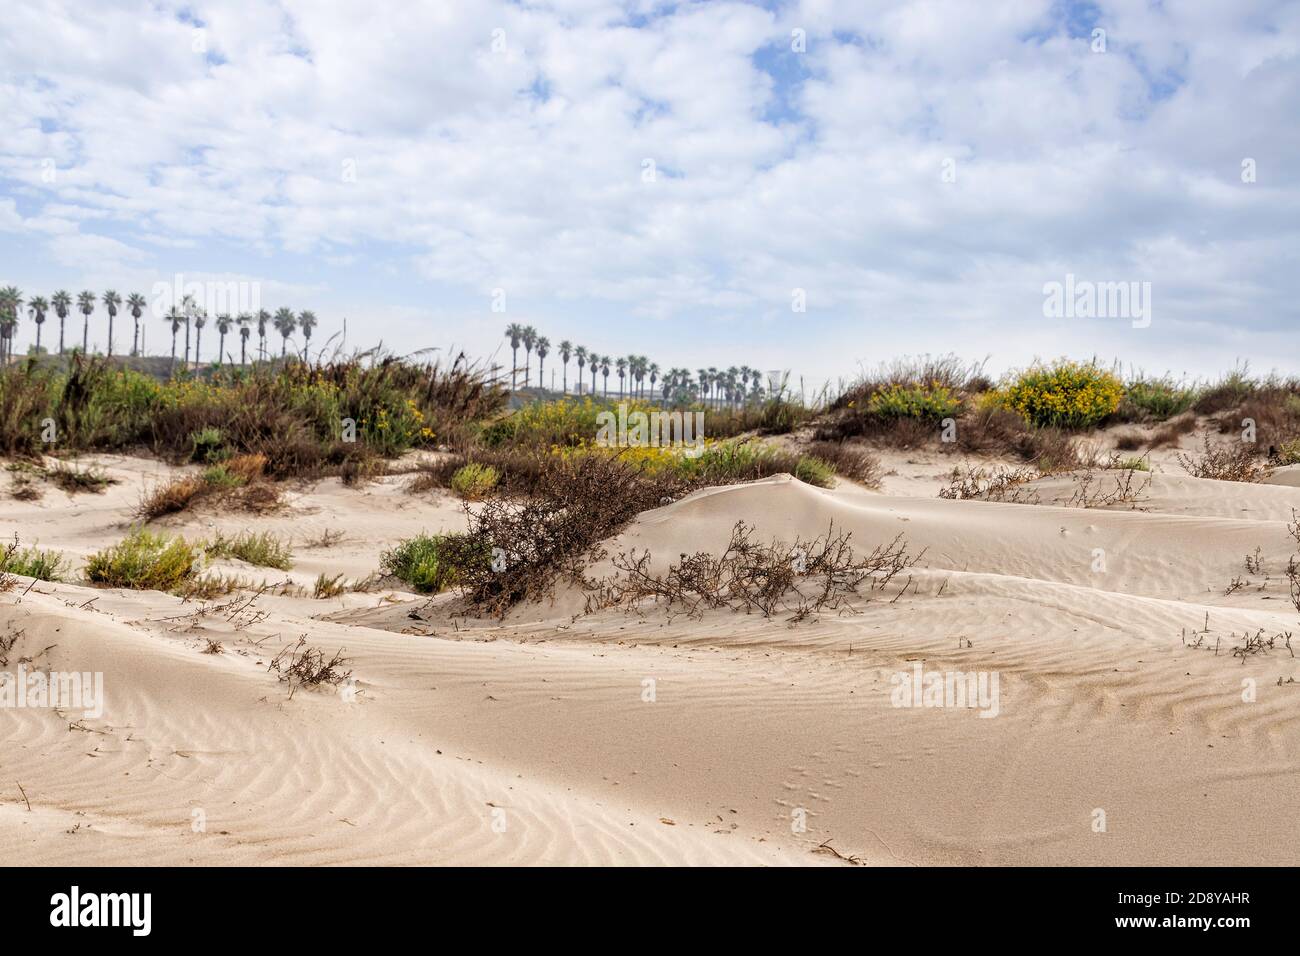 Sand dunes with blooming plants, palms on the horizon against the sky with clouds. Mediterranean coast. Israel Stock Photo